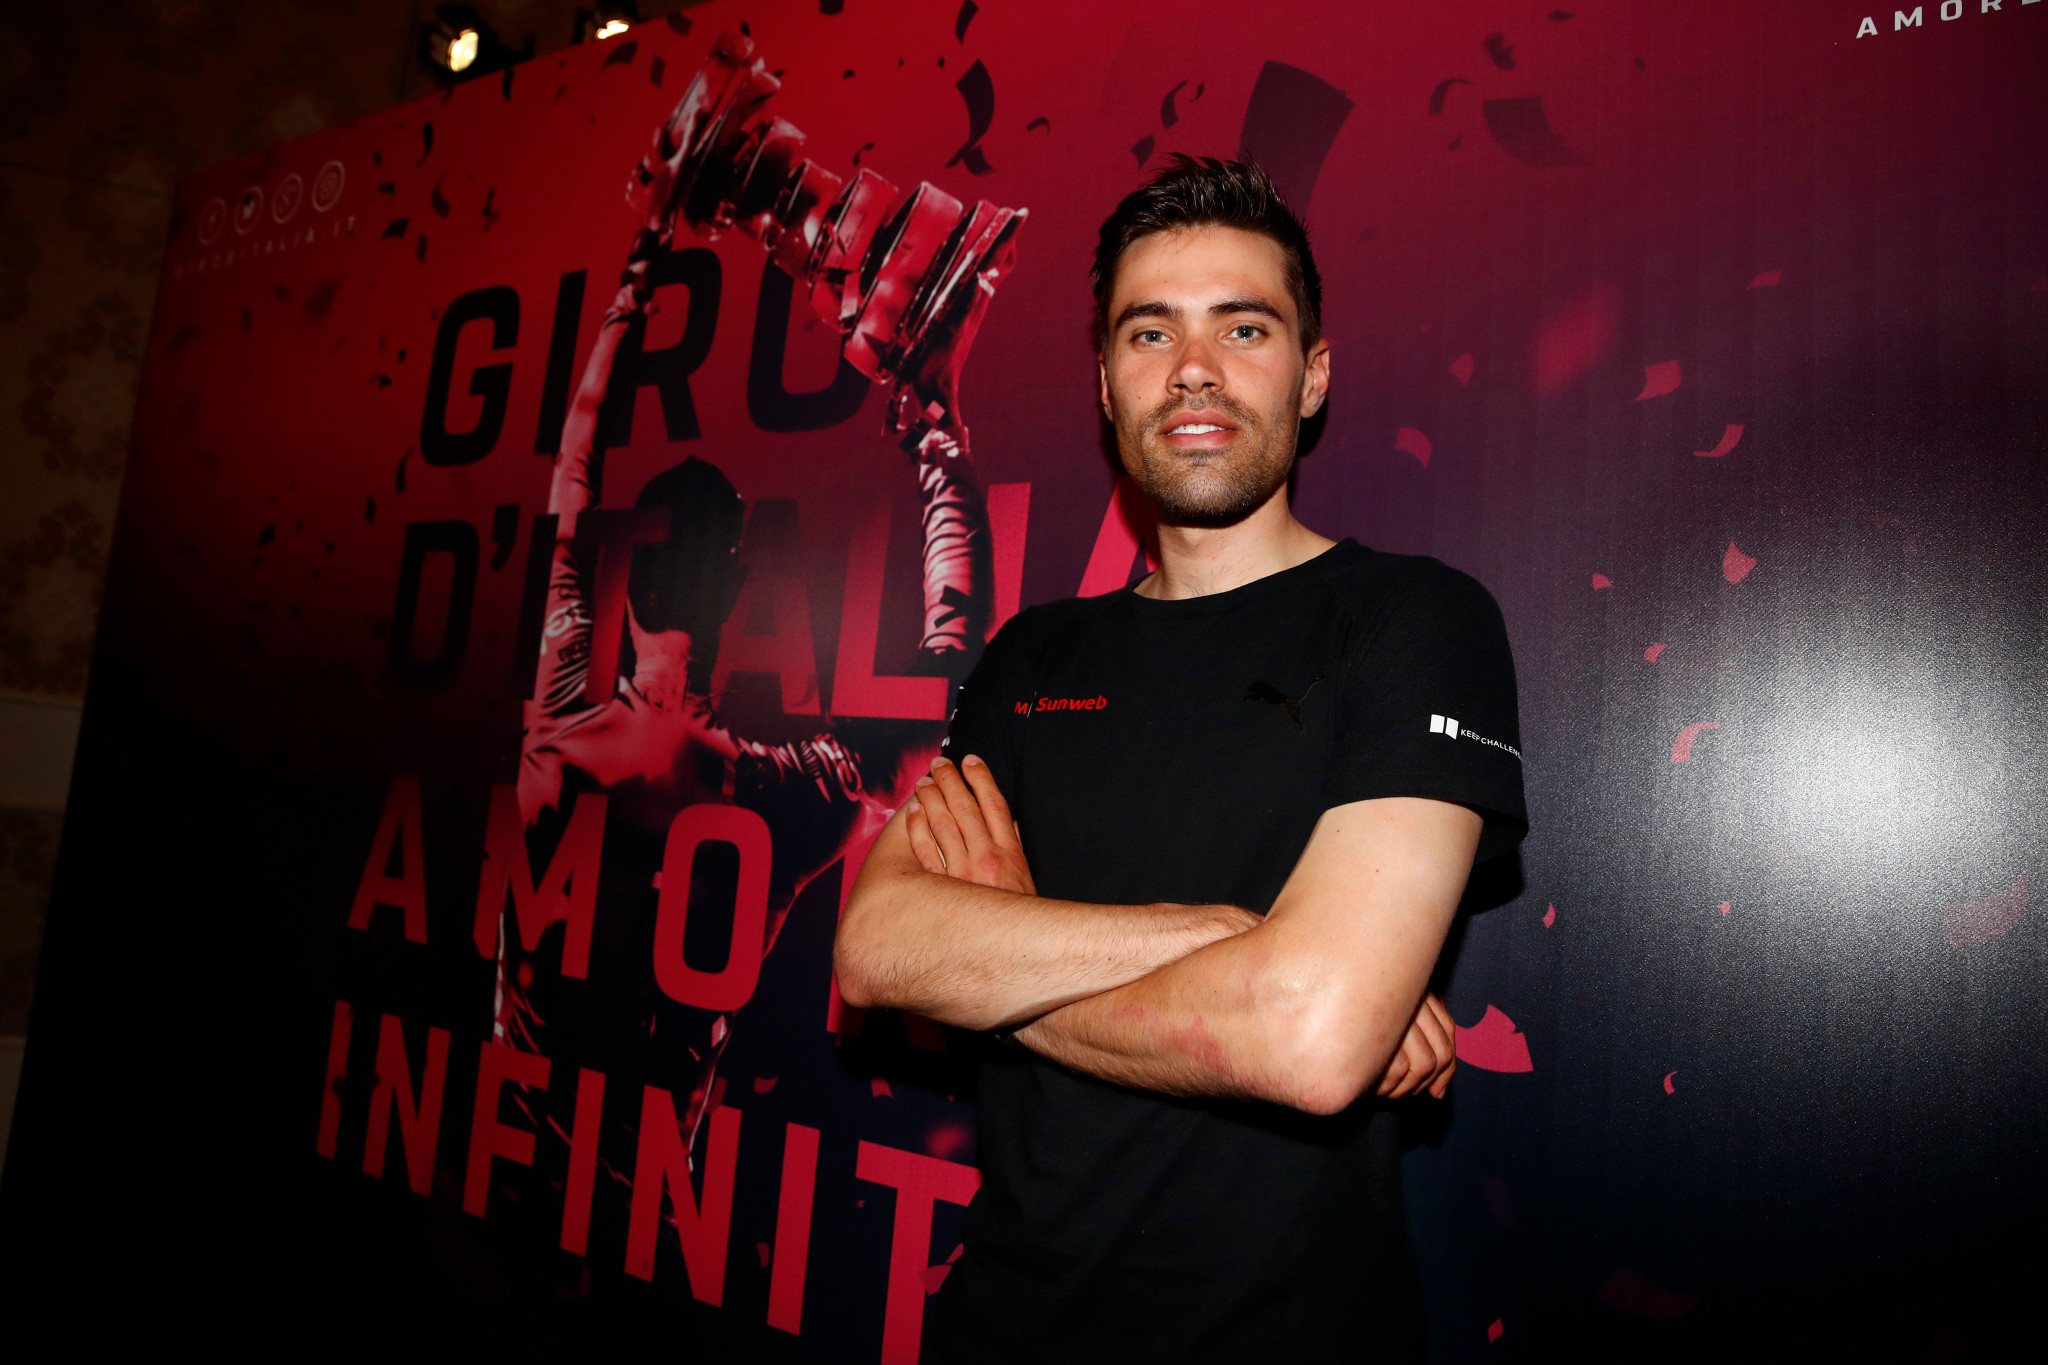 Tom Dumoulin will hope to defend his Giro d'Italia title ©Getty Images